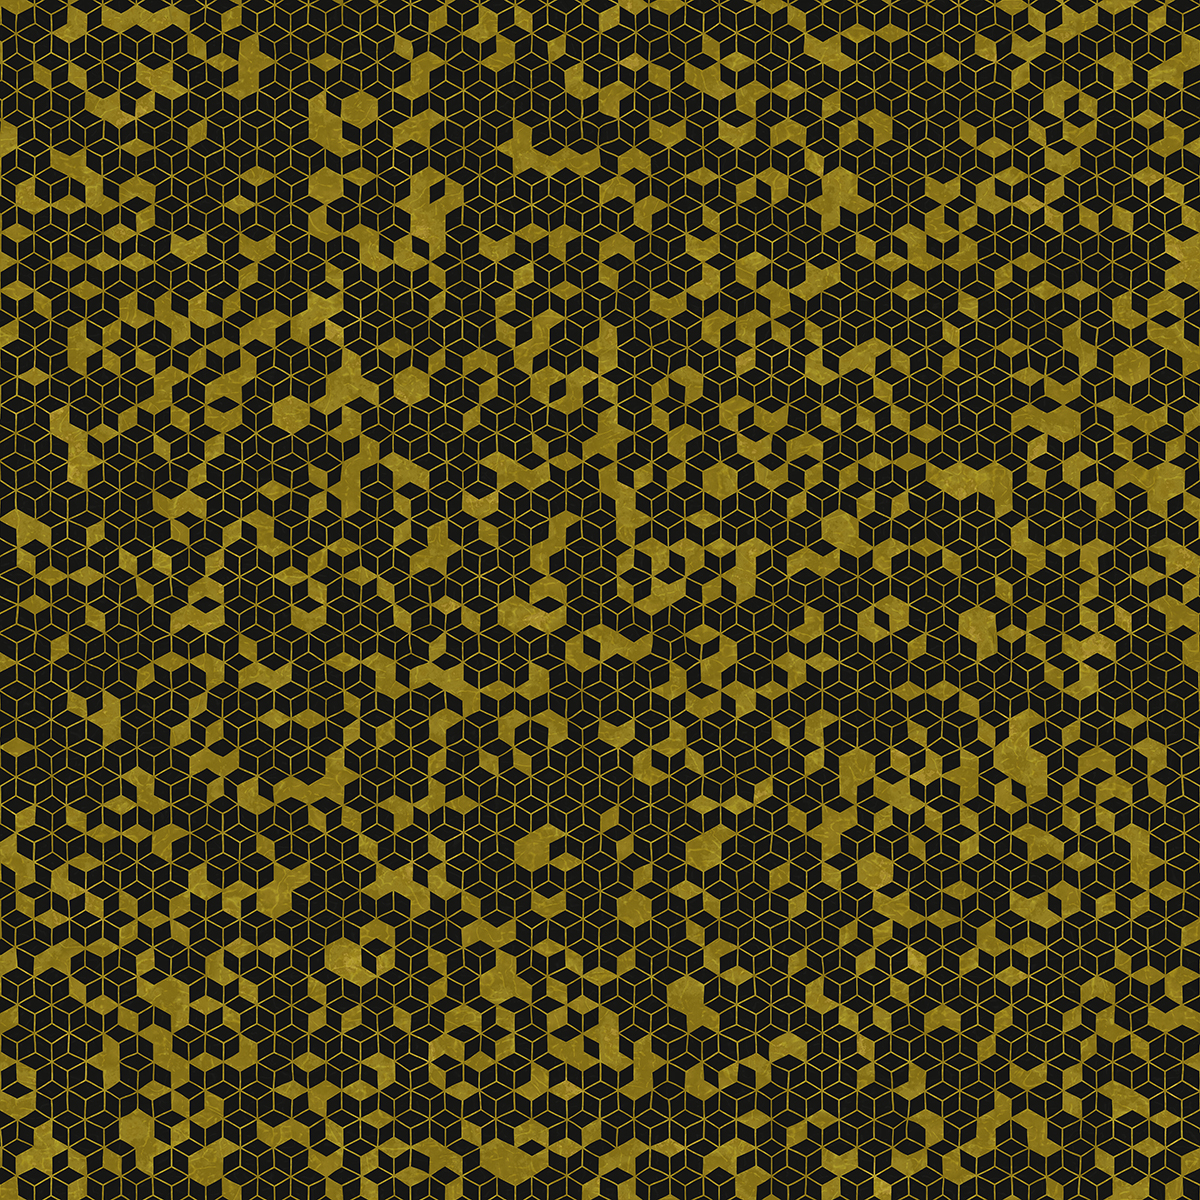 Black and Gold Wrapping Paper PBR Texture